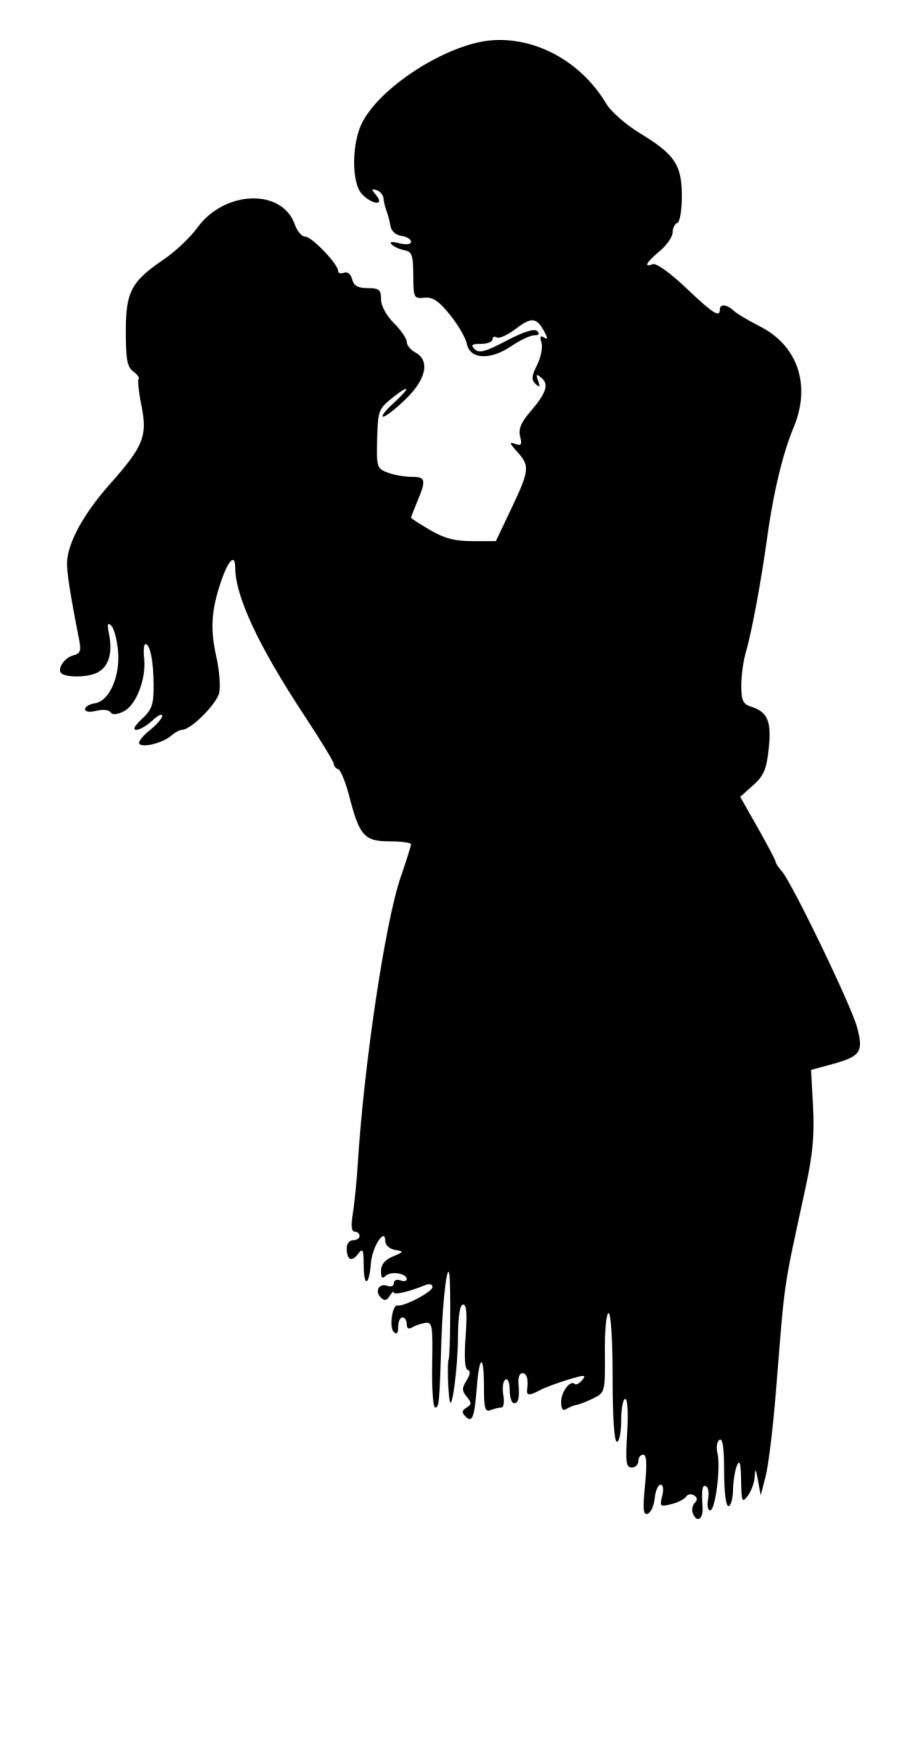 lovers silhouette
